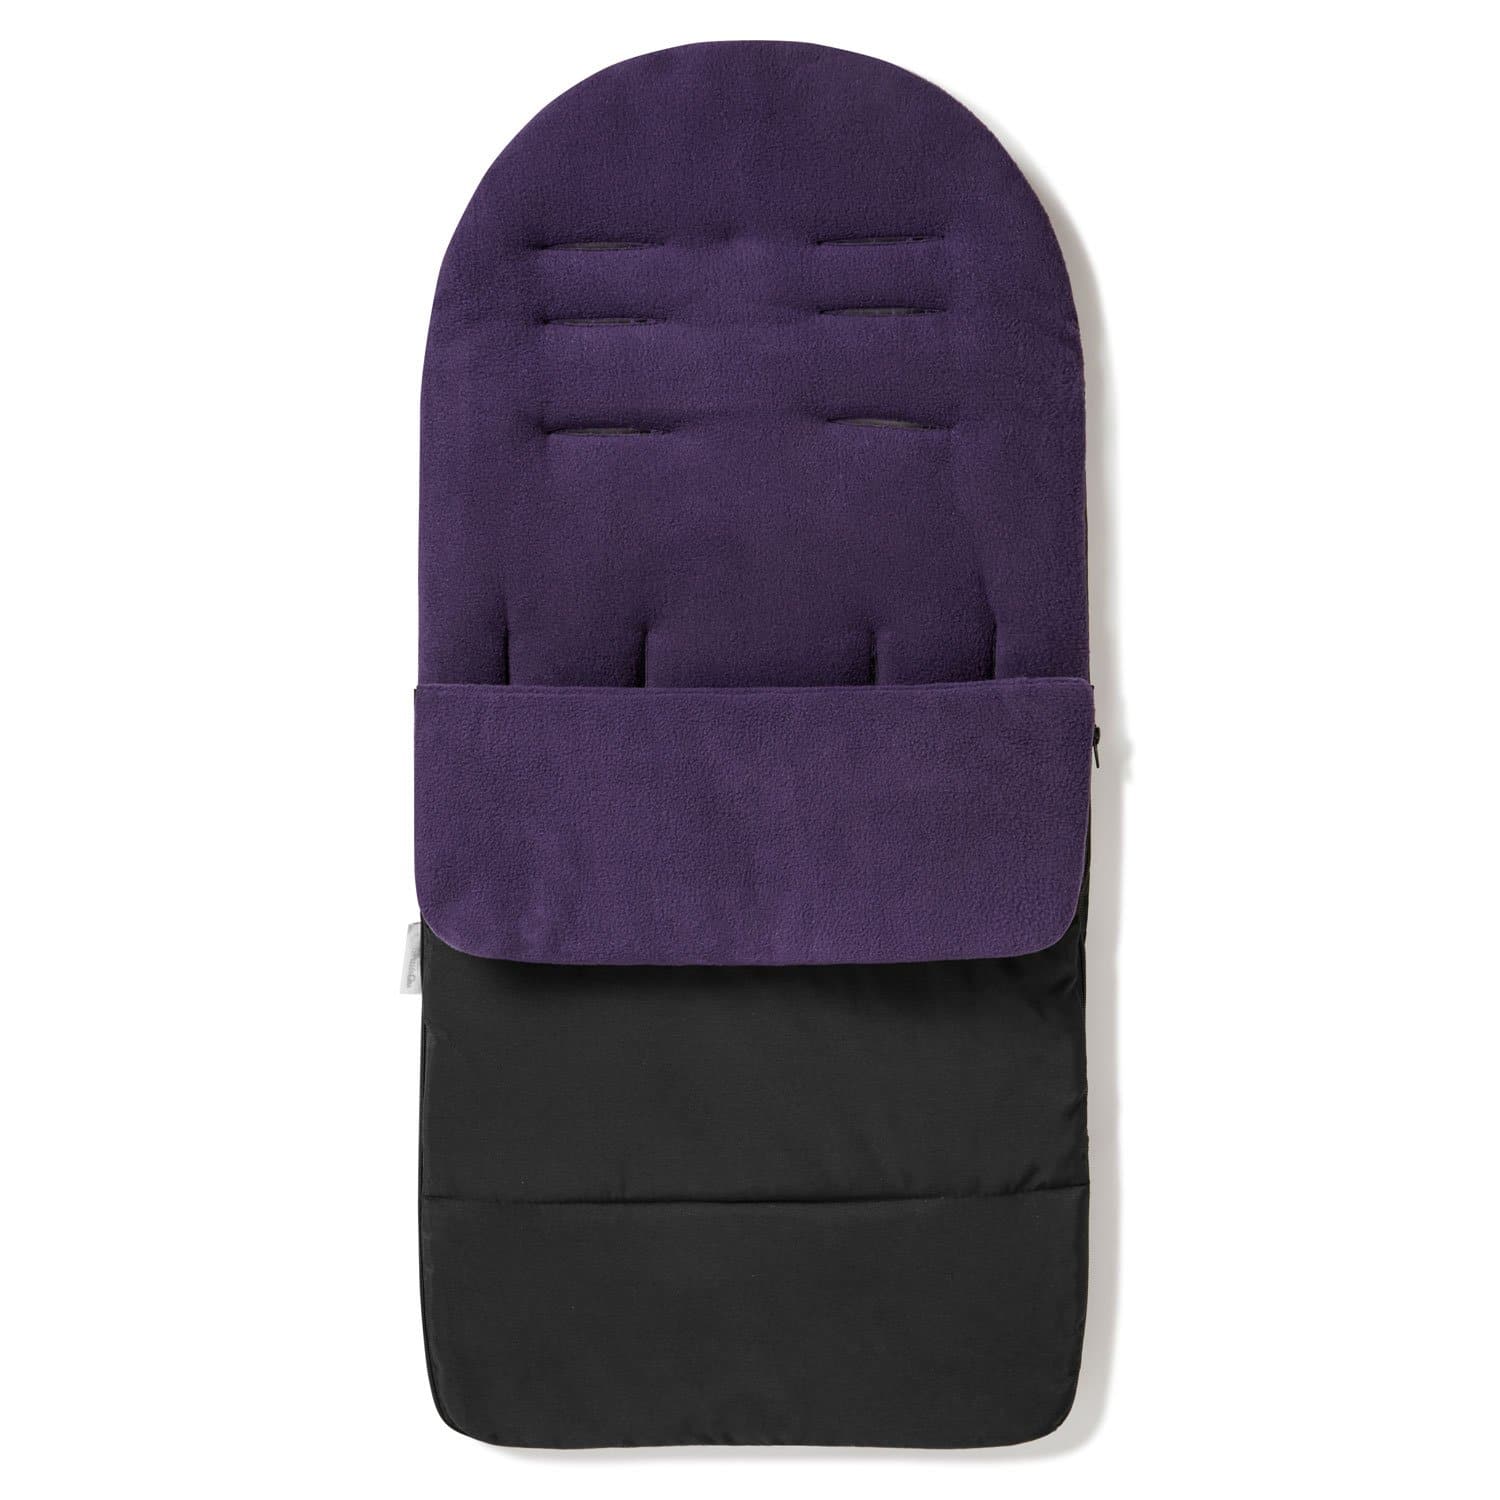 Premium Footmuff / Cosy Toes Compatible with Quinny - Plum Purple / Fits All Models | For Your Little One